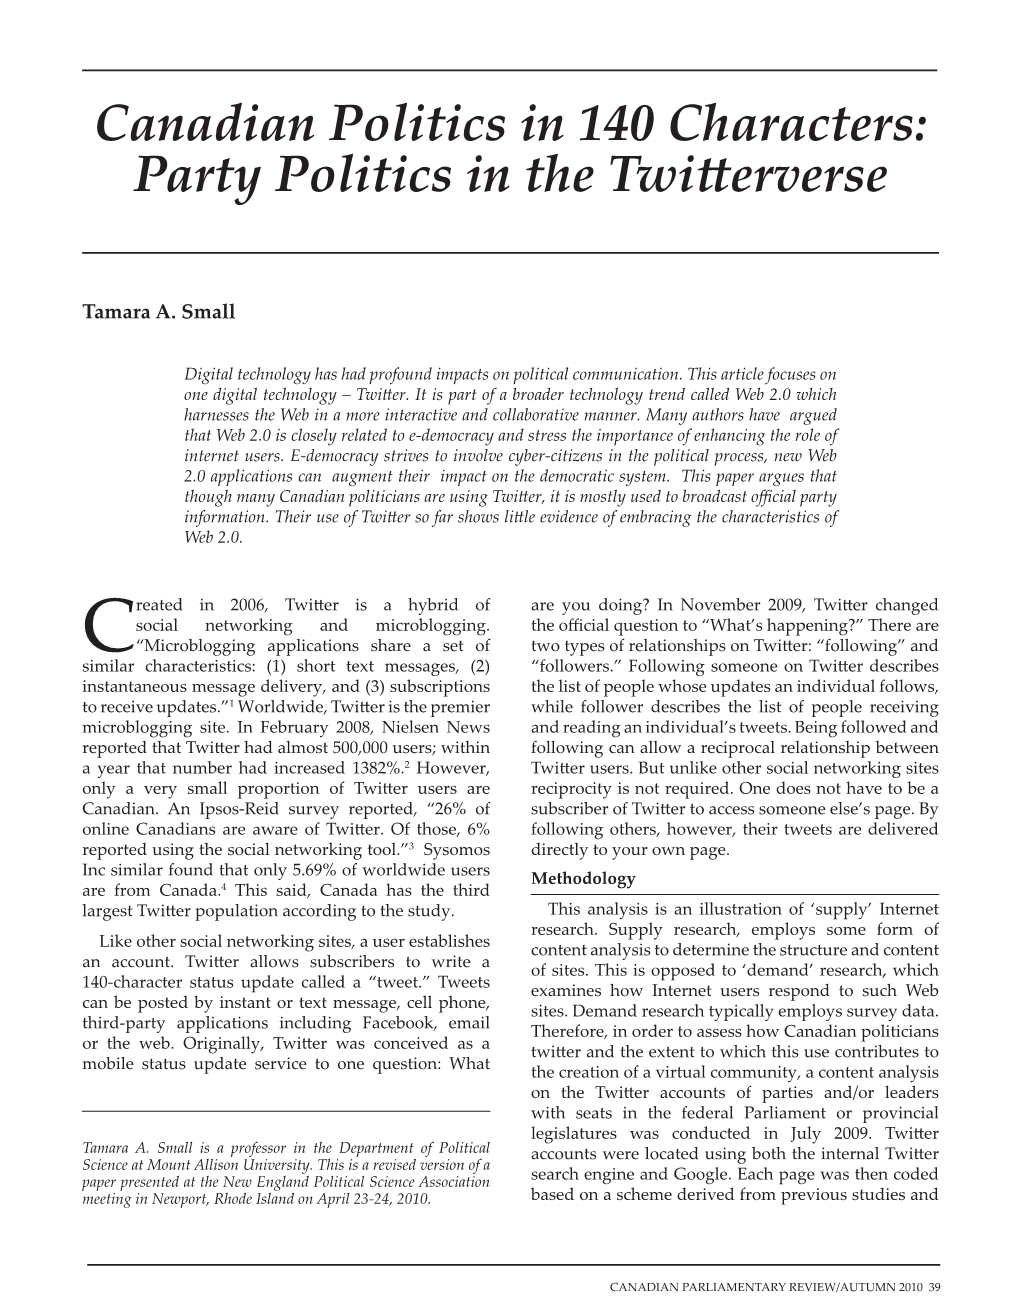 Canadian Politics in 140 Characters: Party Politics in the Twitterverse